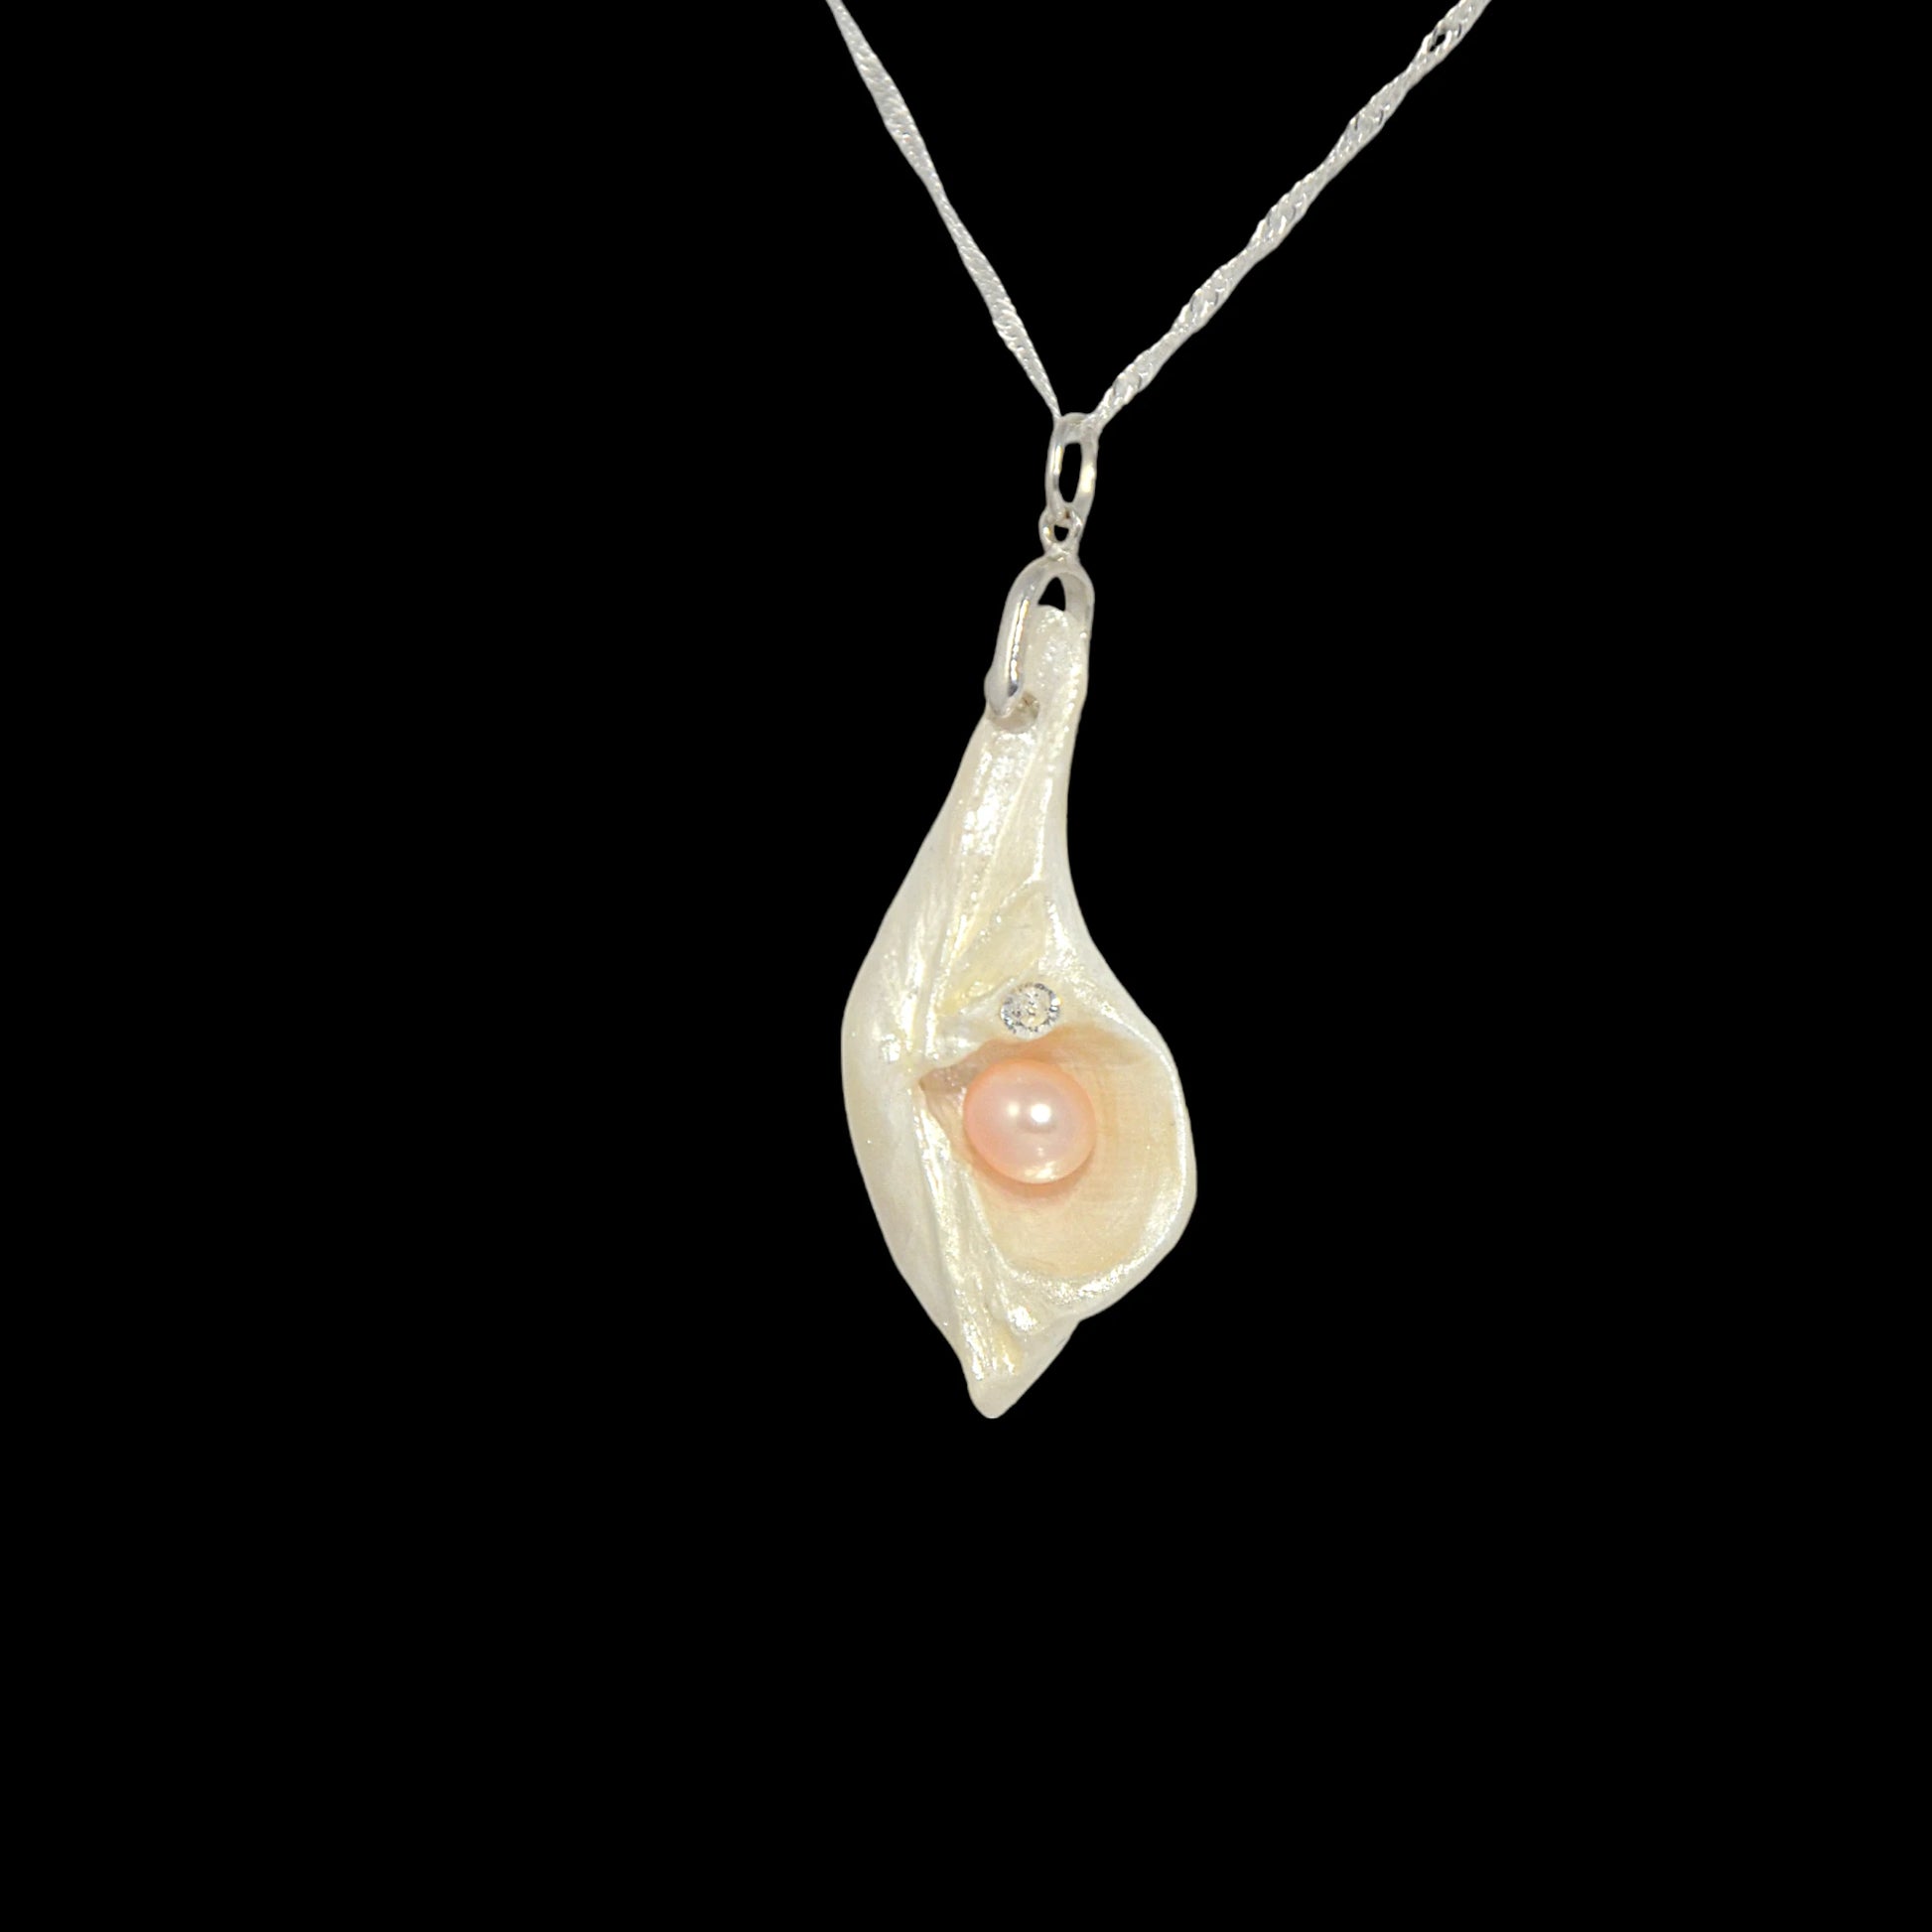 The pendant is showing the left side of the pendant so the viewer can see the pearl and herkimer diamond.